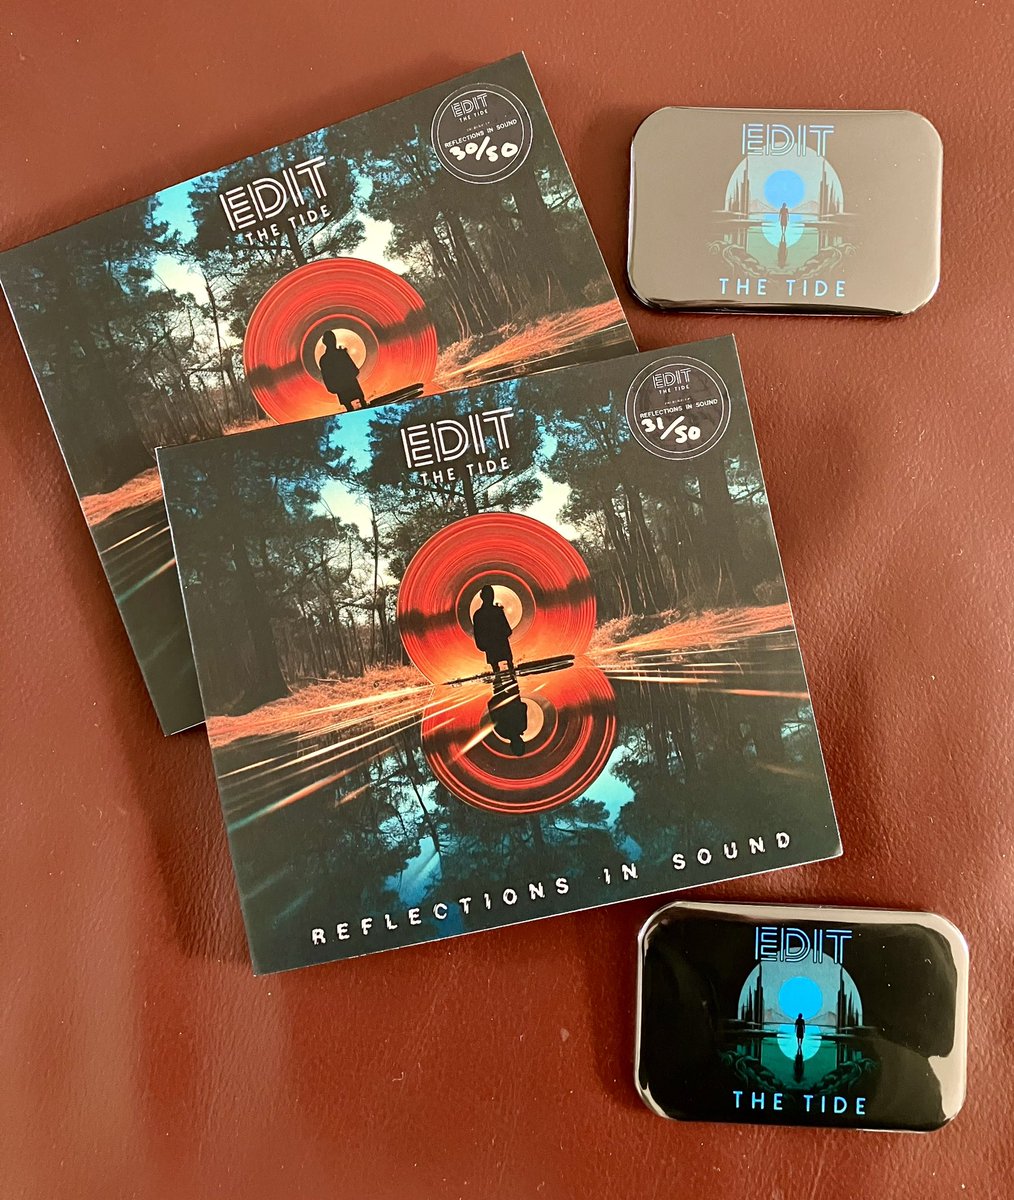 Hey, @darealKent, look what the postie brought us! The splendid new EP from @EditTheTideBand. And a snazzy badge each, too. How about we meet up @WildFireFestUK, I'll exchange one of yours for beer, and we can watch them tear it up live? 🤔😉😎🤘